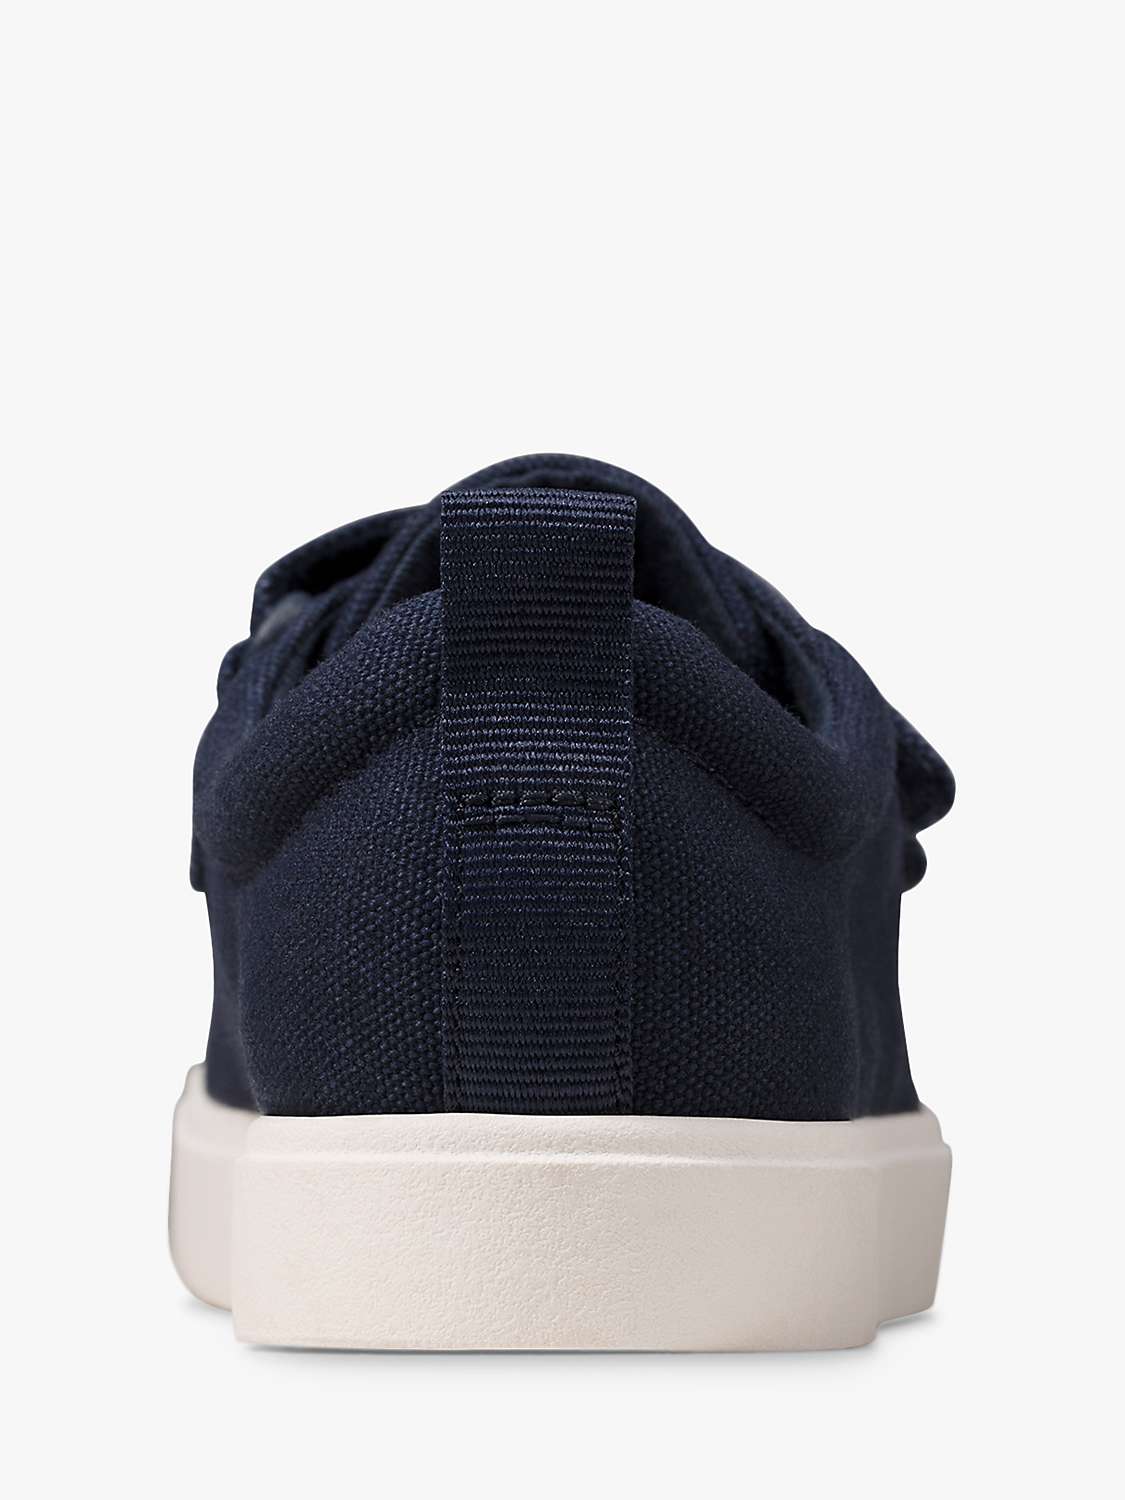 Buy Clarks Kids' City Vibe Riptape Trainers, Navy Canvas Online at johnlewis.com